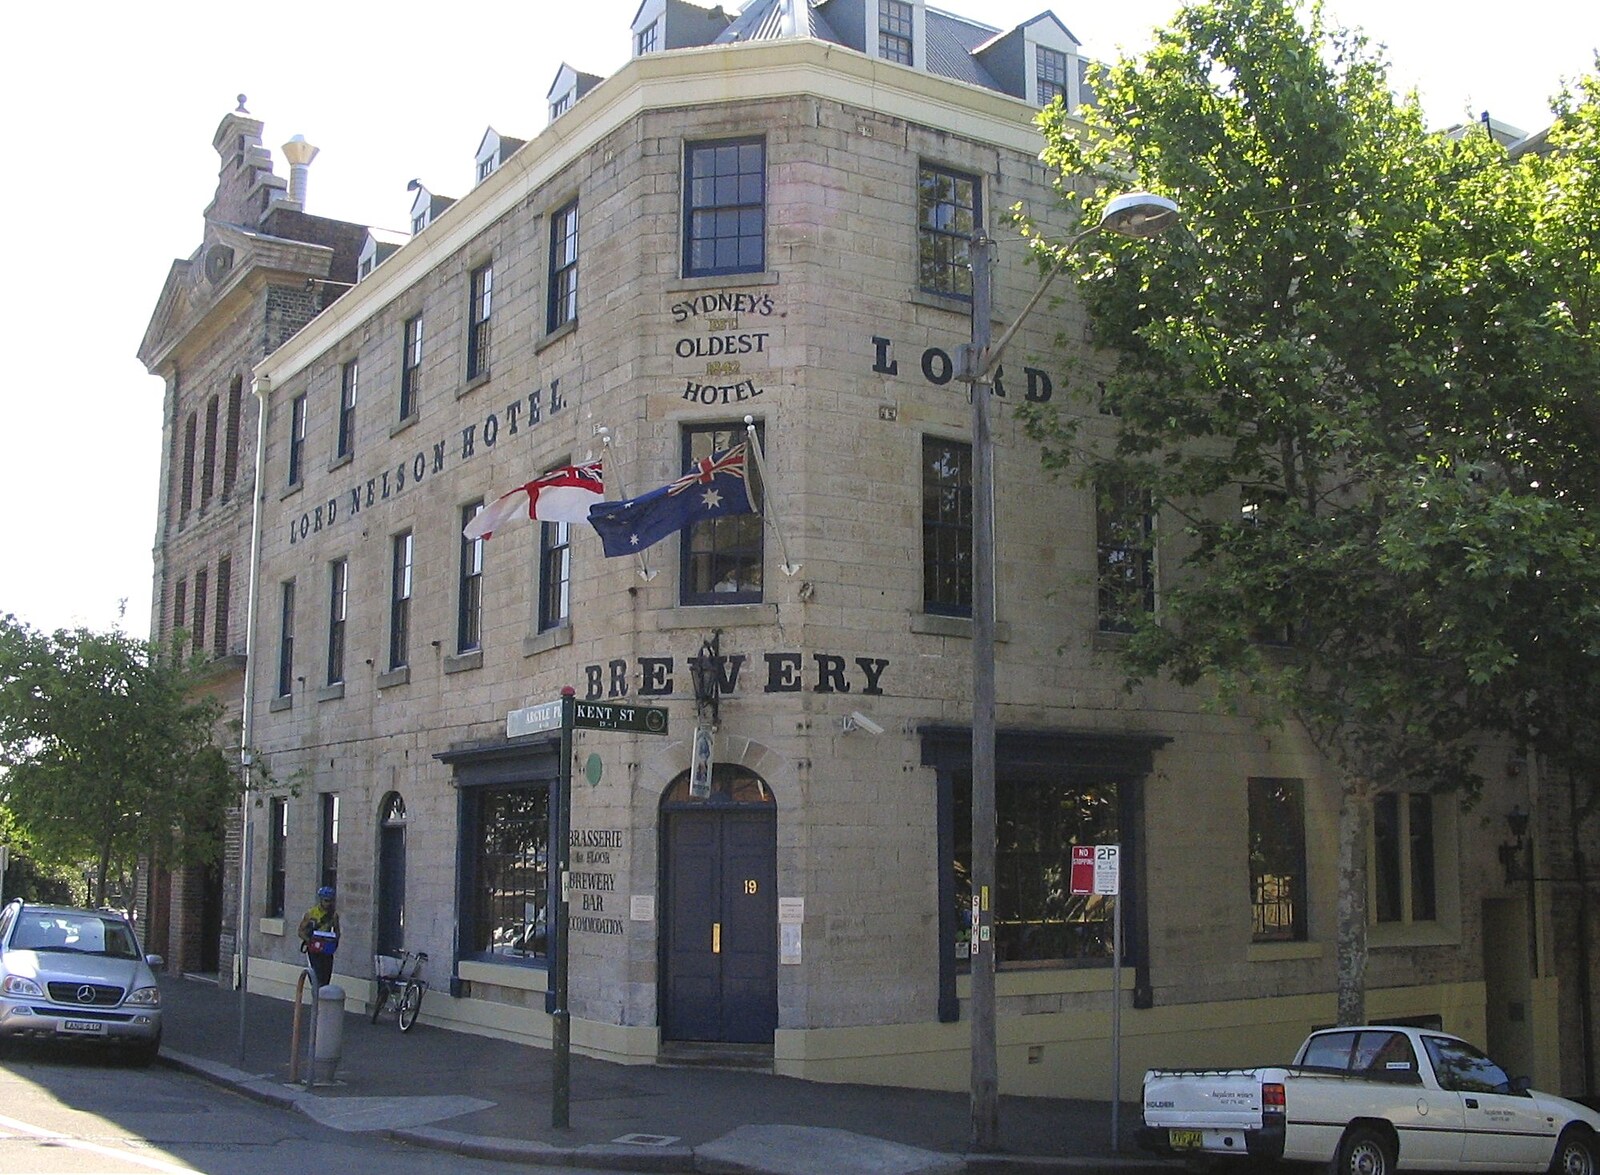 The Lord Nelson Hotel from Sydney, New South Wales, Australia - 10th October 2004